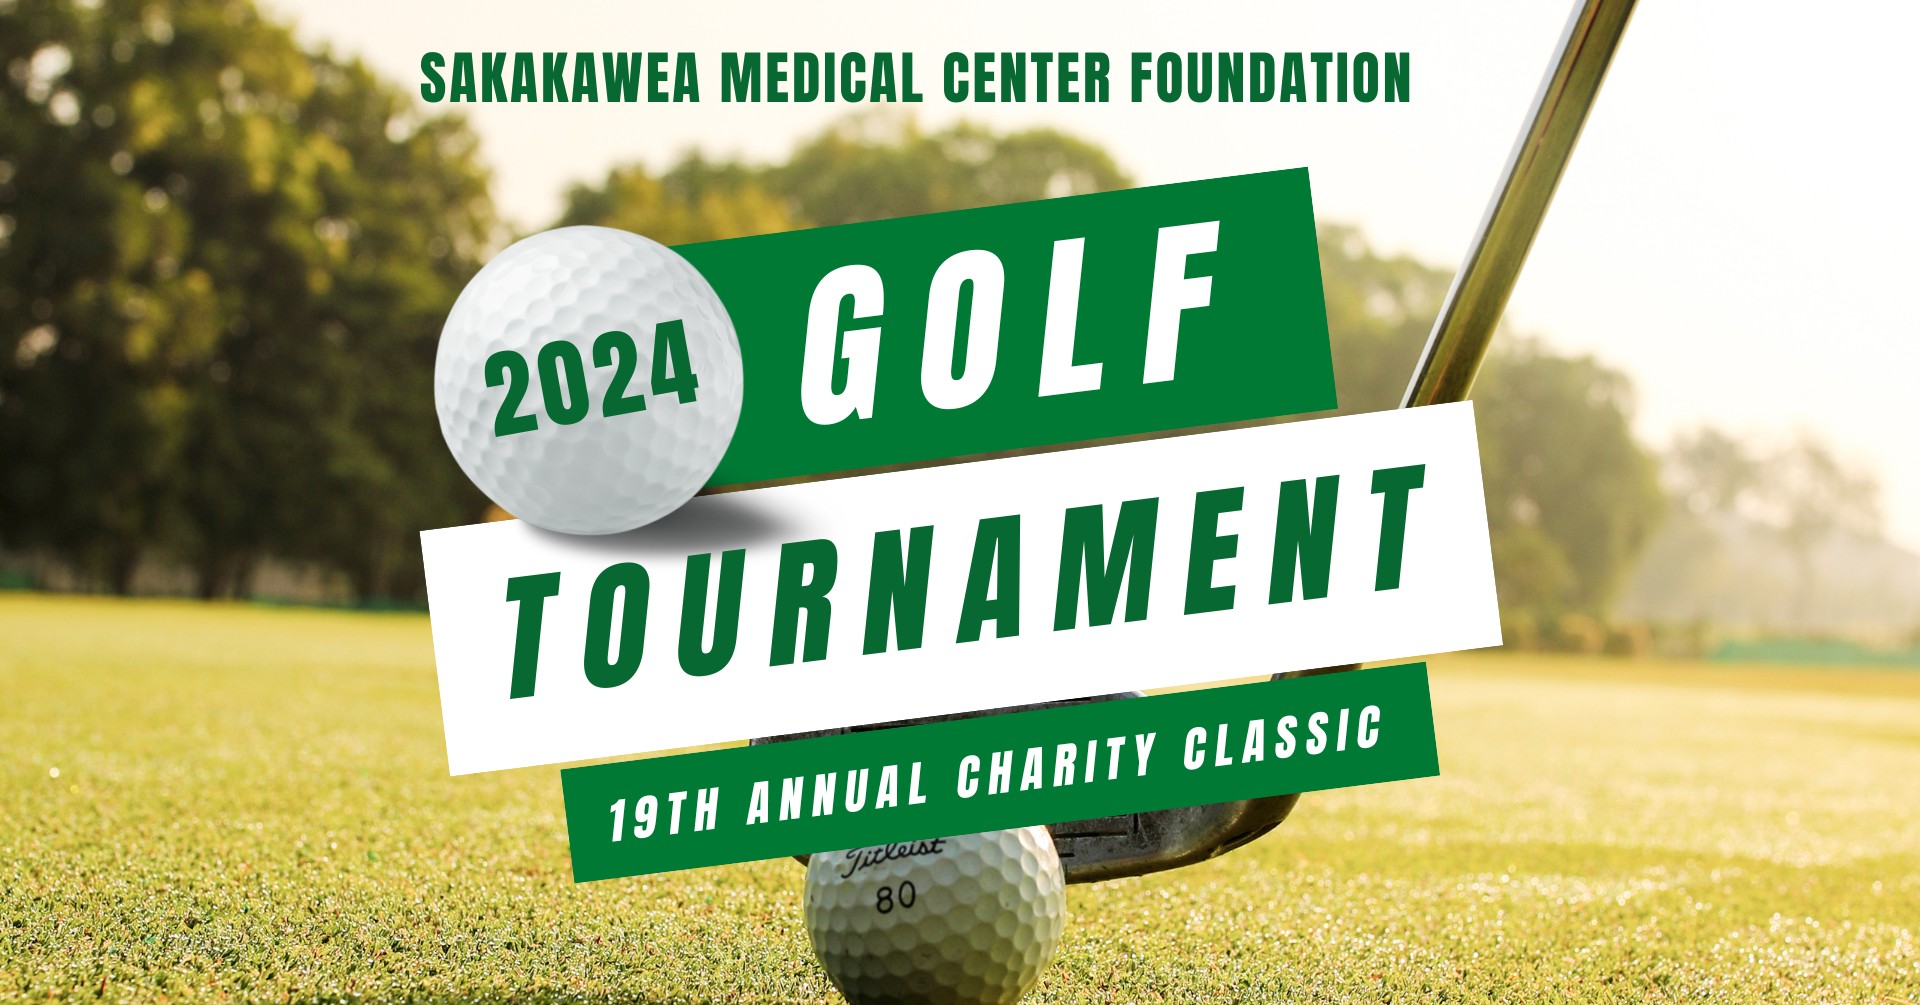 Event Promo Photo For 19th Annual Charity Golf Tournament